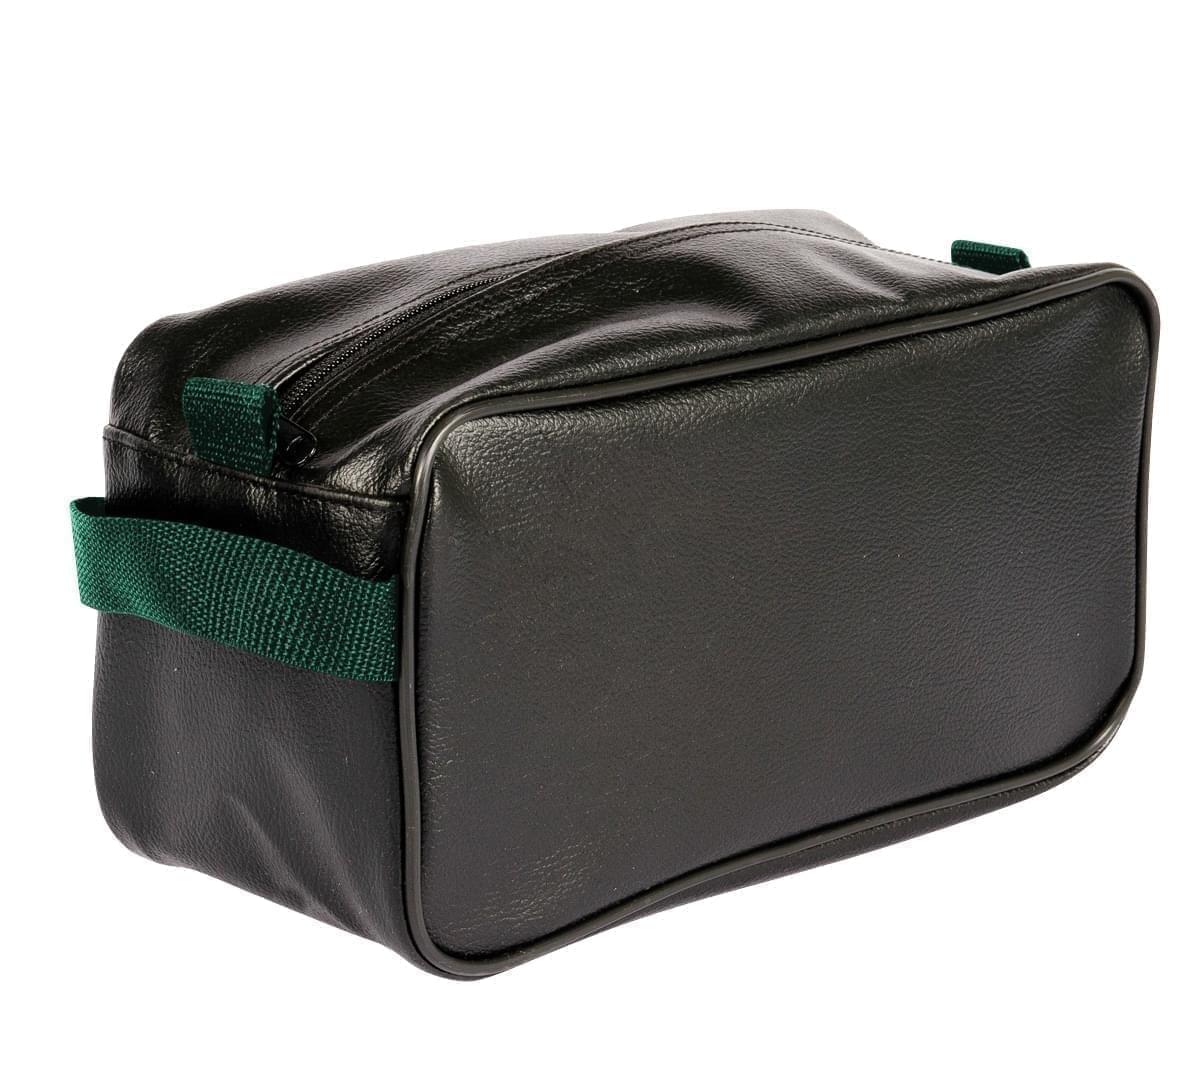 USA Made Cosmetic & Toiletry Cases, Black-Hunter Green, 3000996-AOV